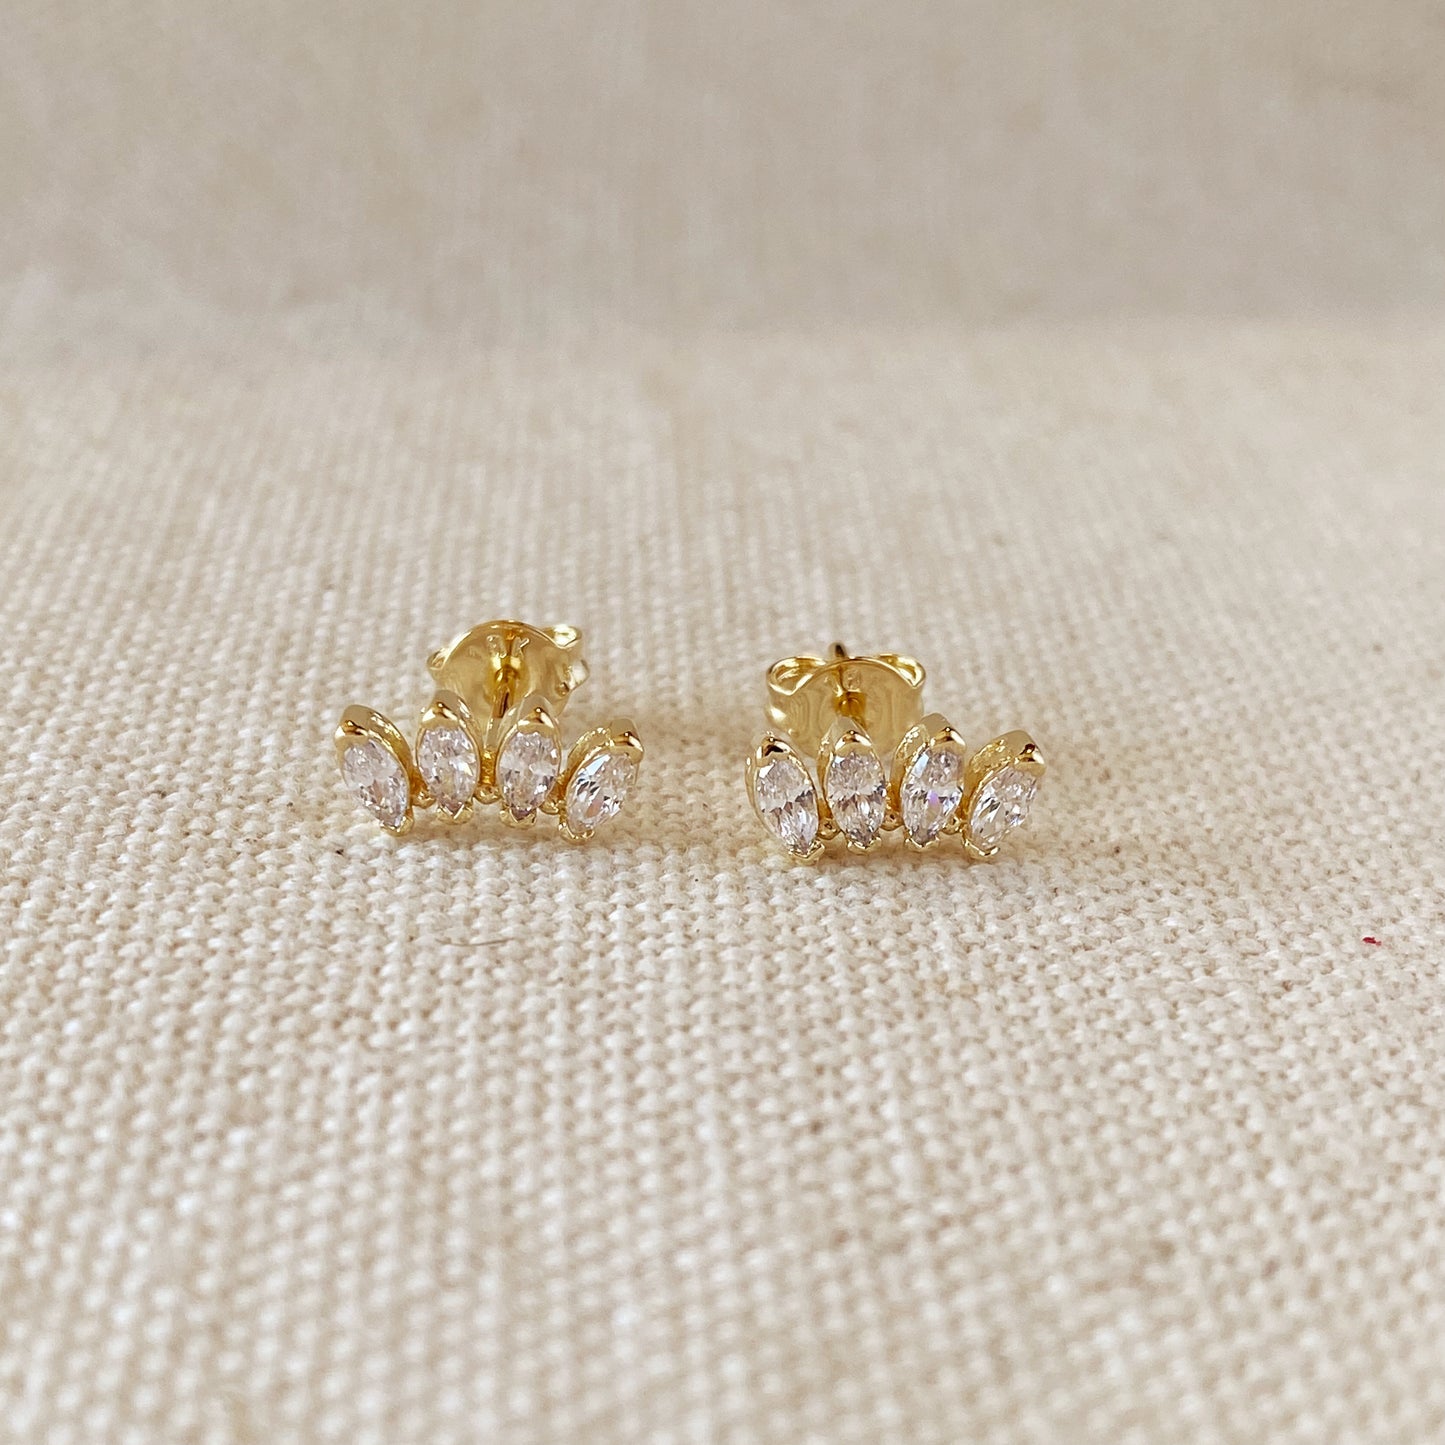 18k Gold Filled Slightly Curved Cubic Zirconia Stud Earrings